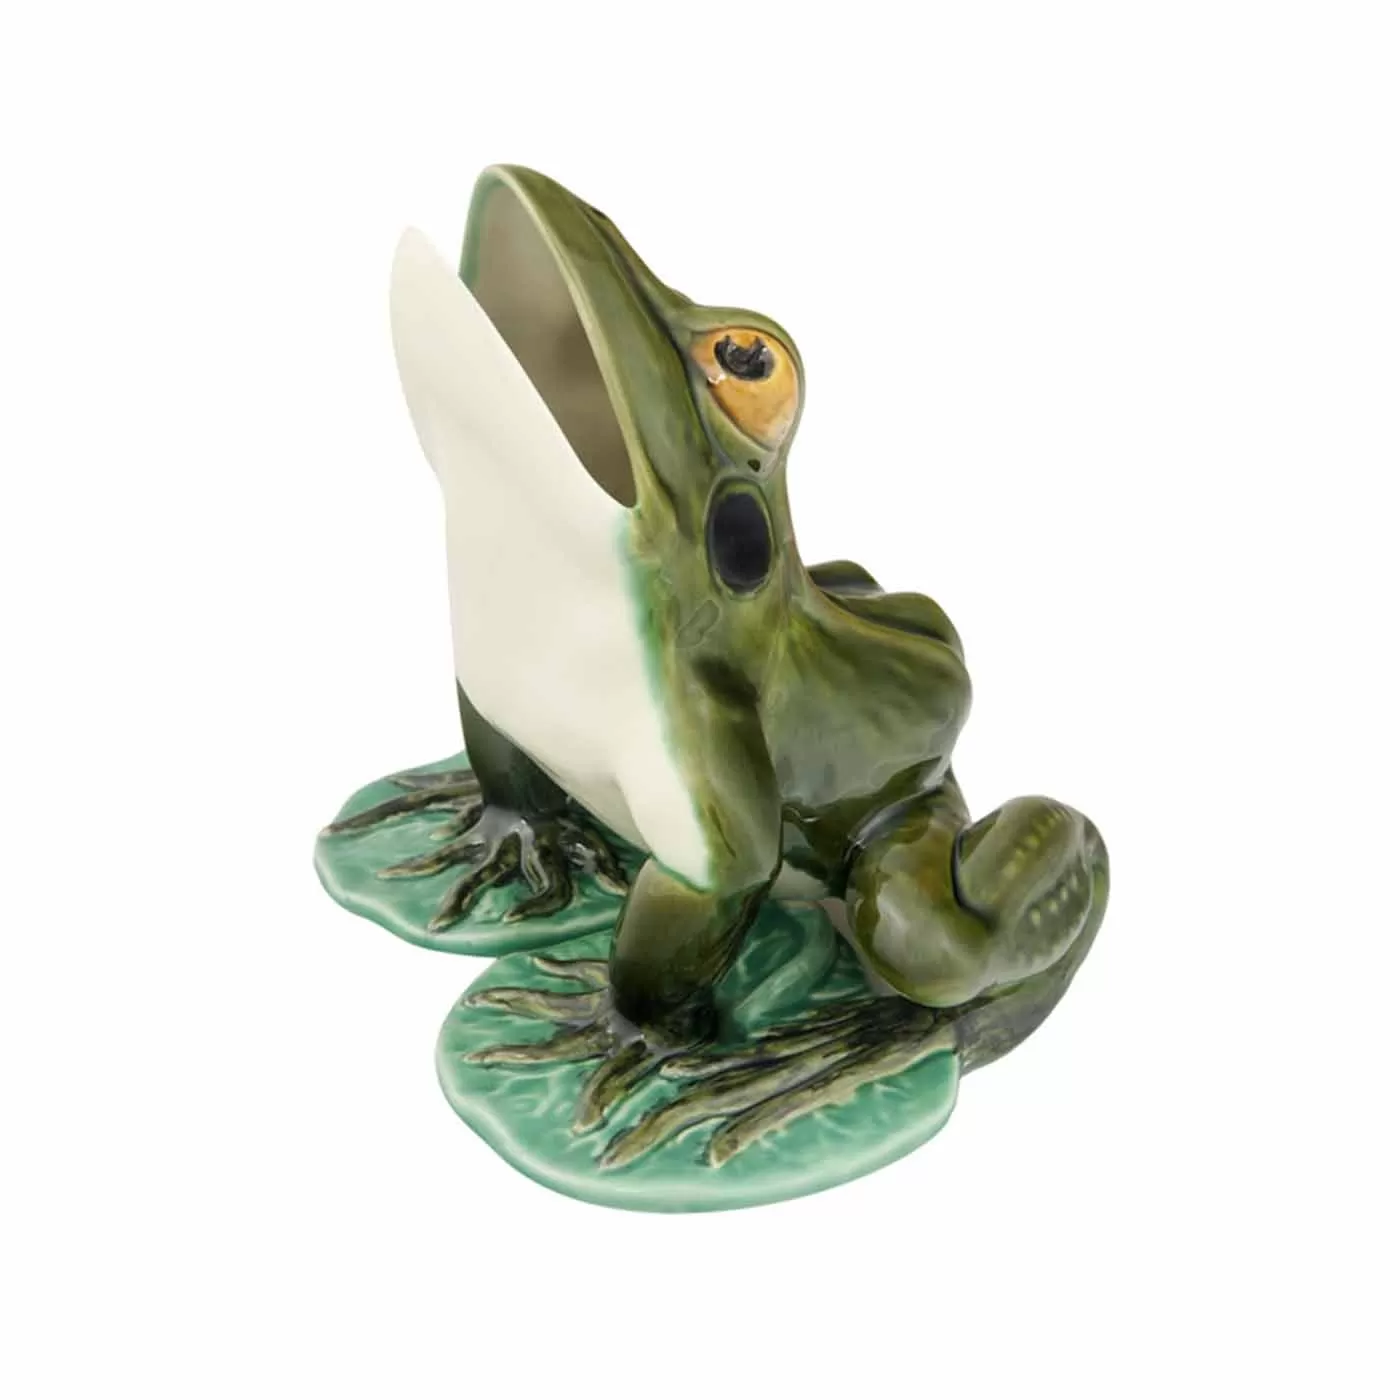 Little Porcelain Frog with Open Mouth Storage Container – The